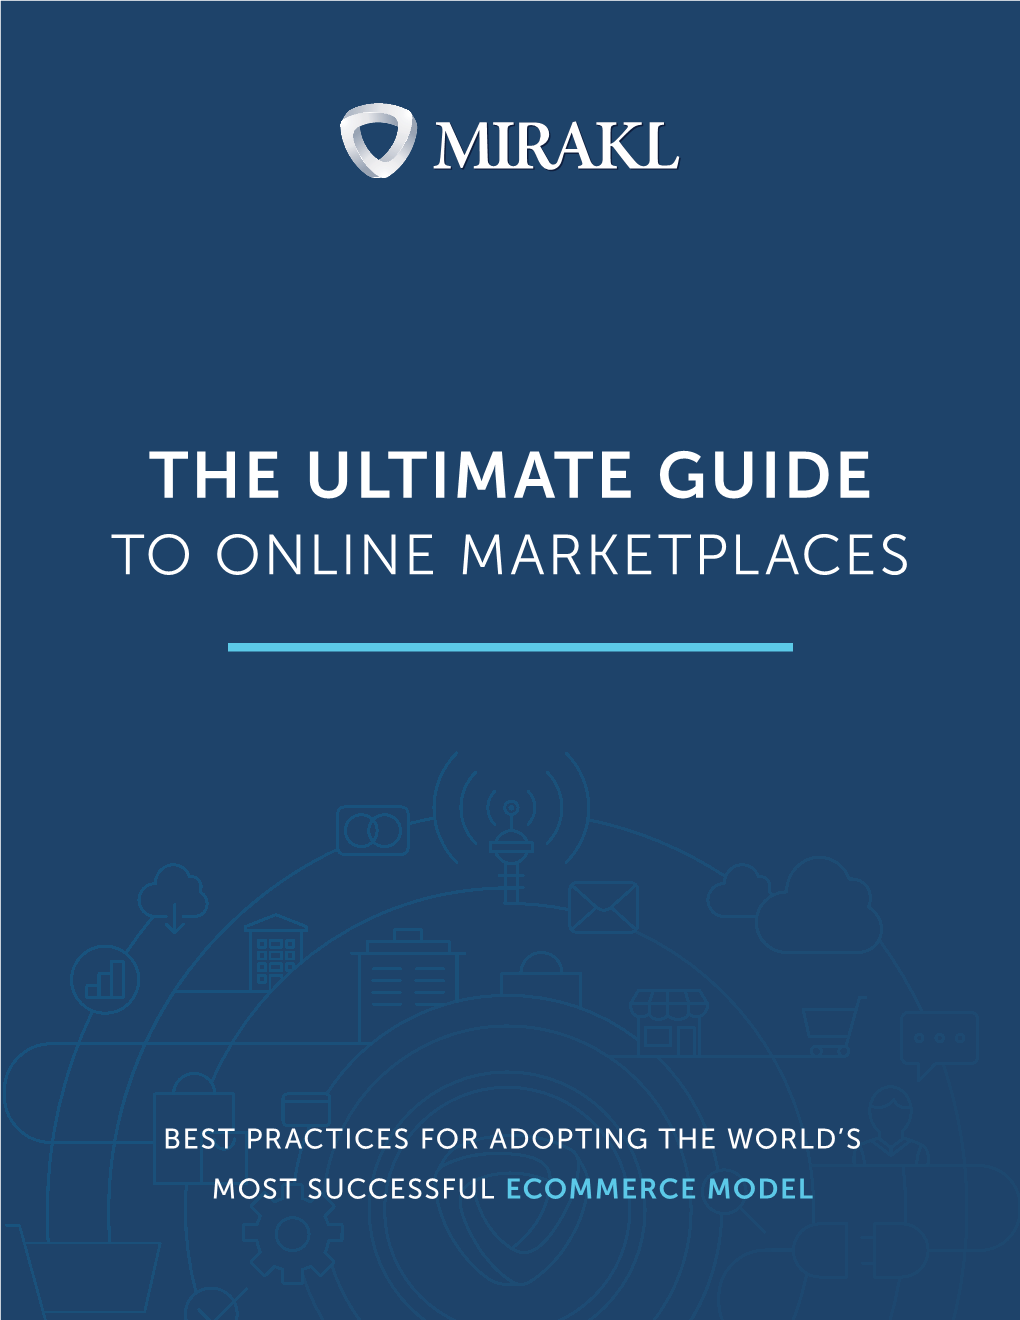 The Ultimate Guide to Online Marketplaces